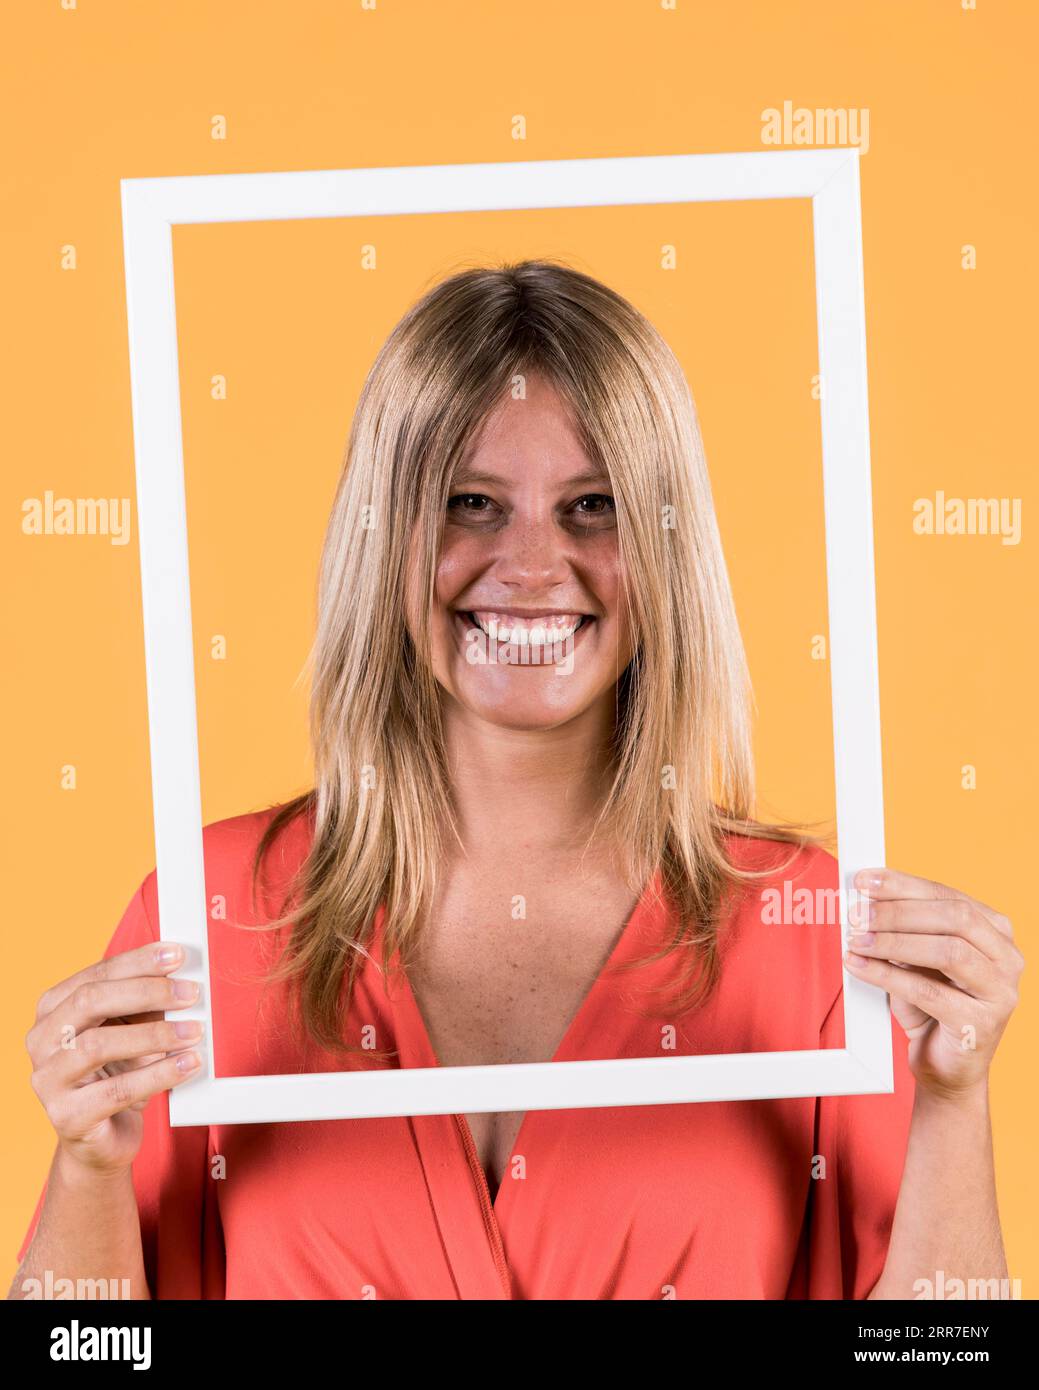 Young smiling woman holding white border frame front her face Stock Photo